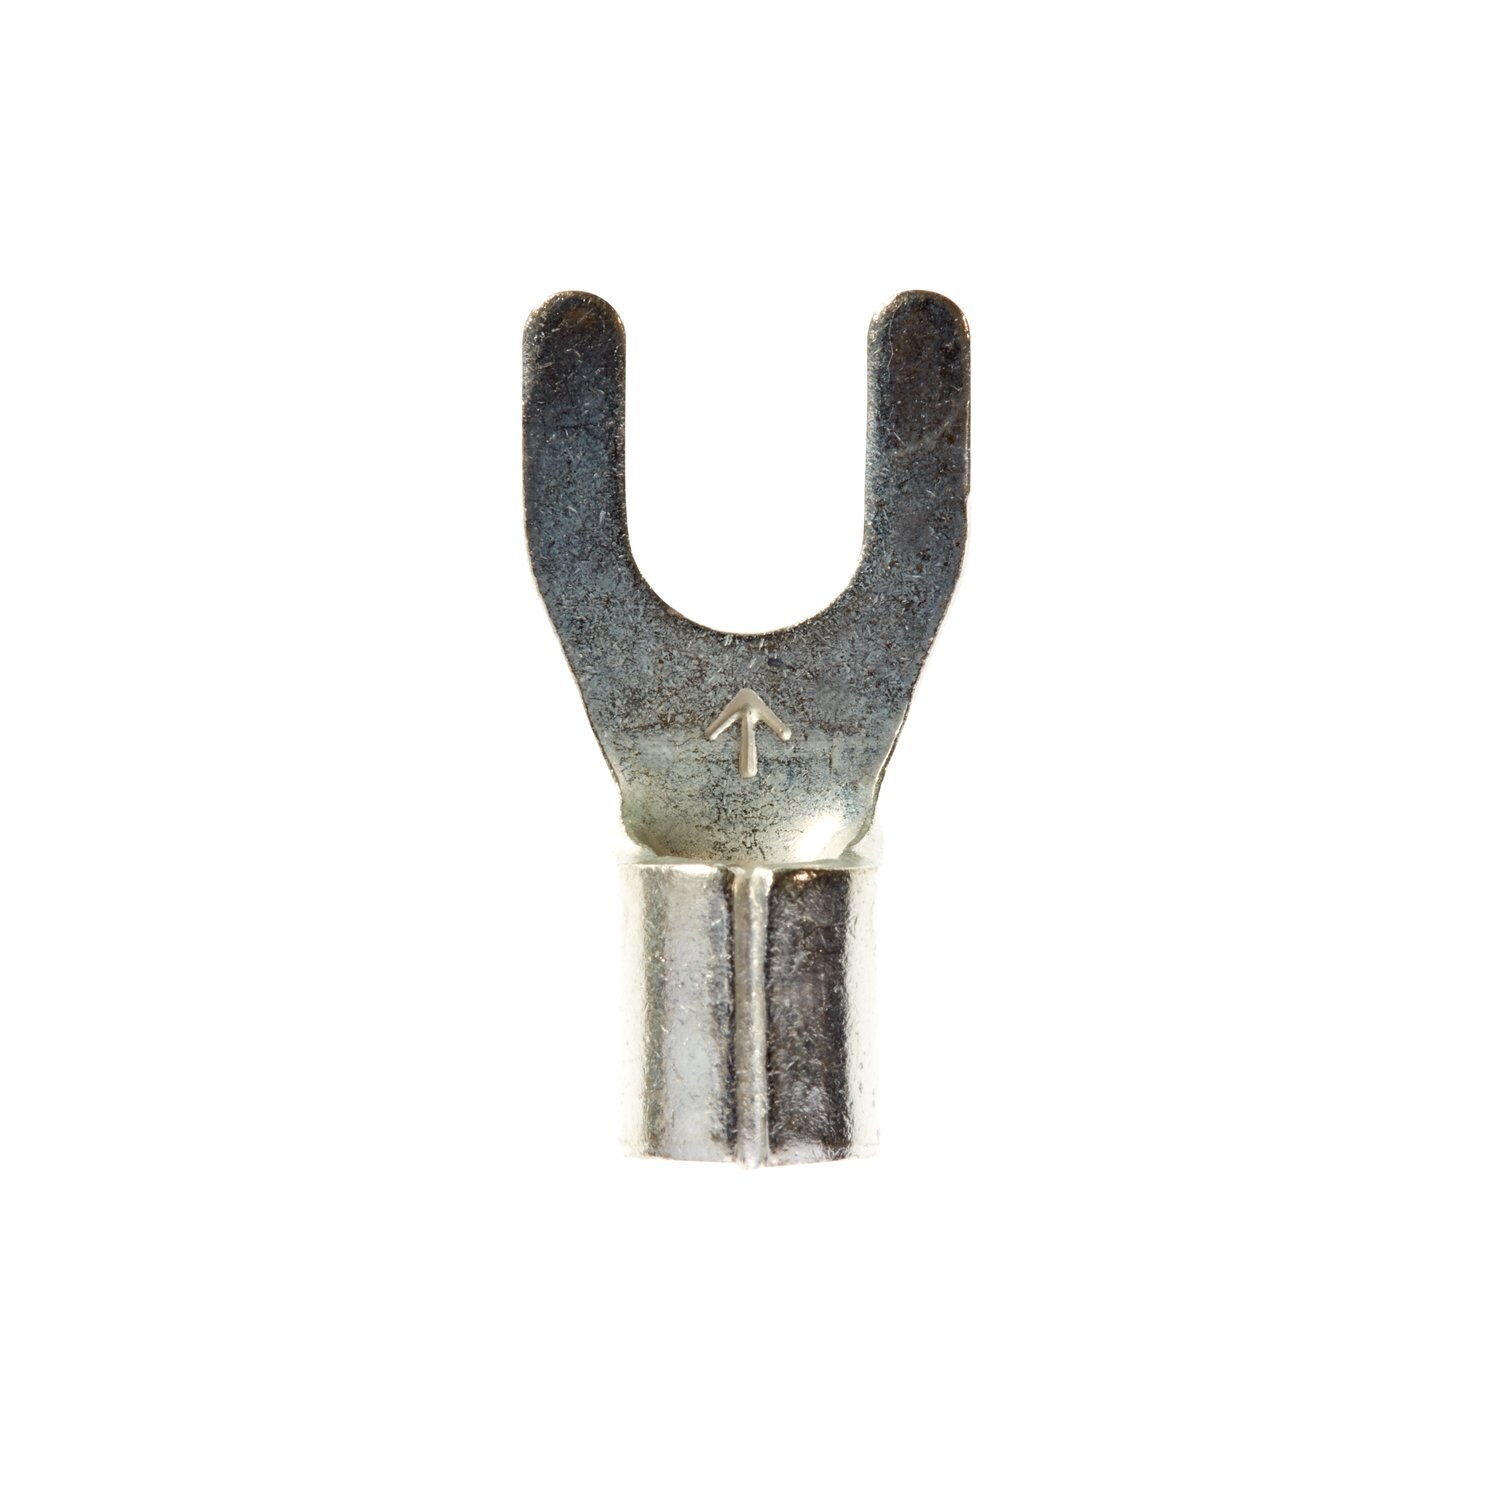 7010399929 - 3M Scotchlok Fork Non-Insulated, 50/bottle, M10-10FX, wider-tongue
design for use on free-standing studs, 500/Case